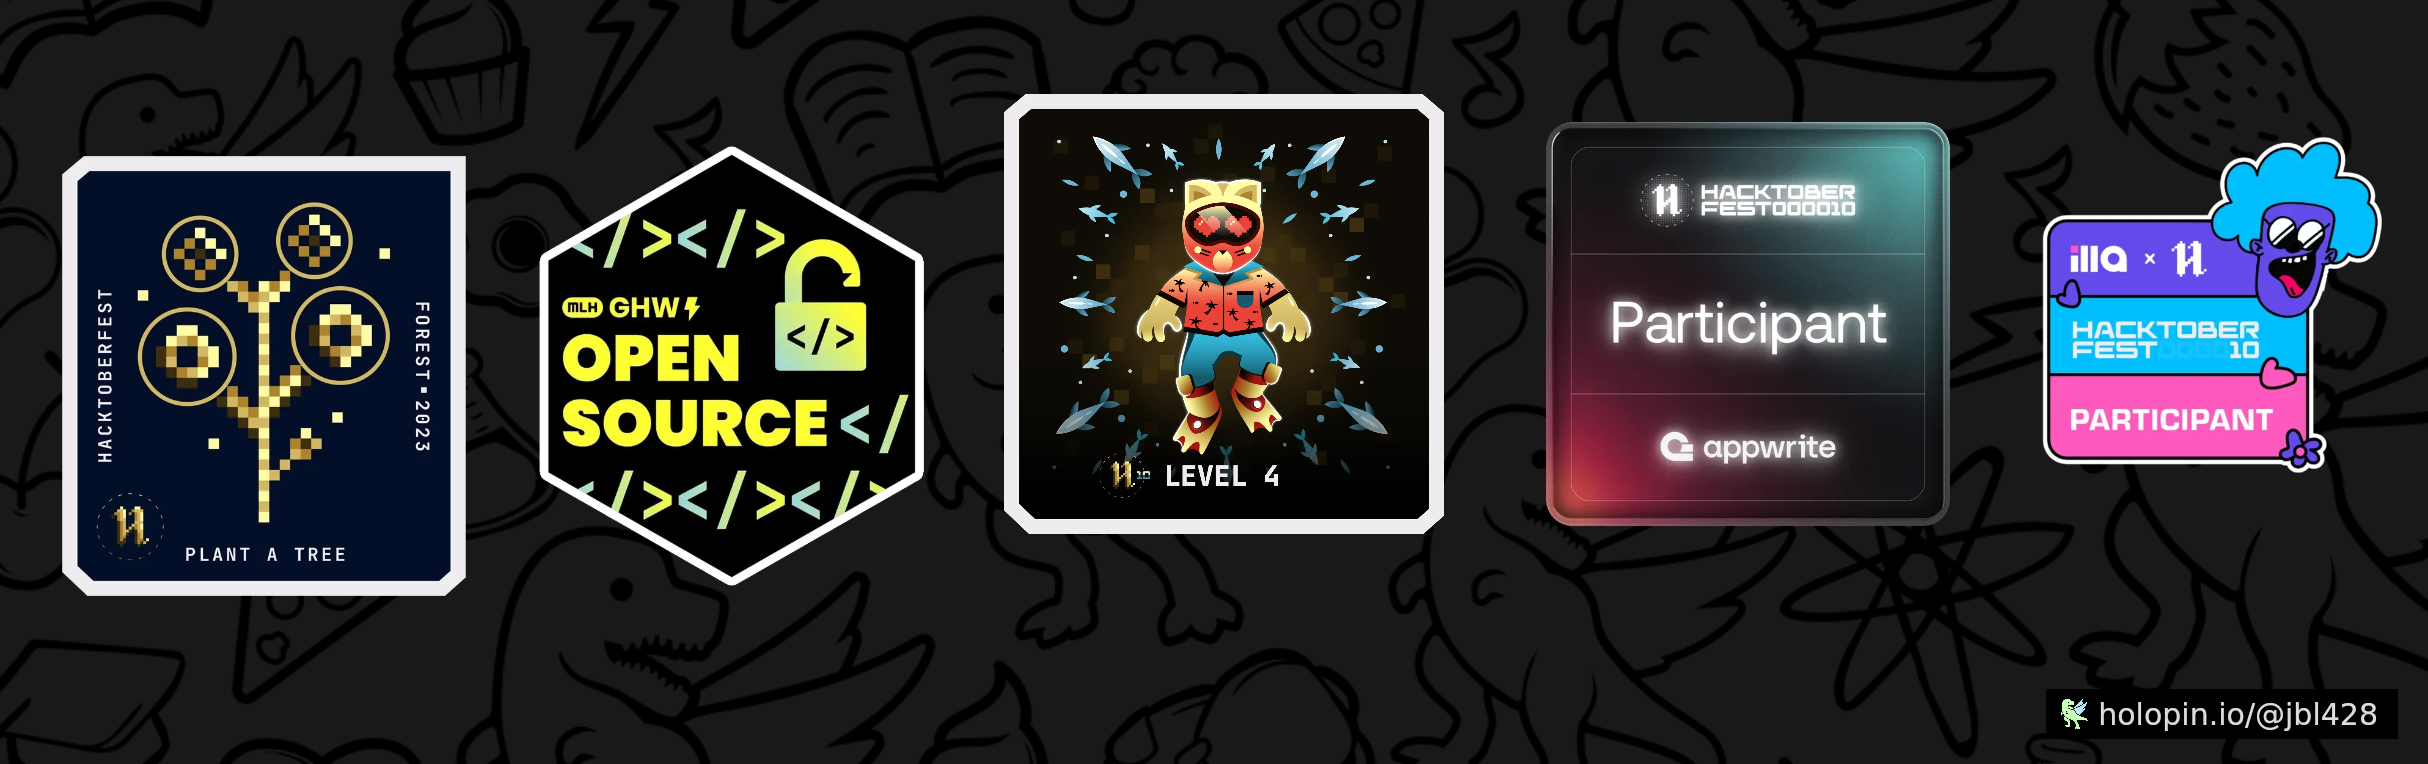 An image of @jbl428's Holopin badges, which is a link to view their full Holopin profile